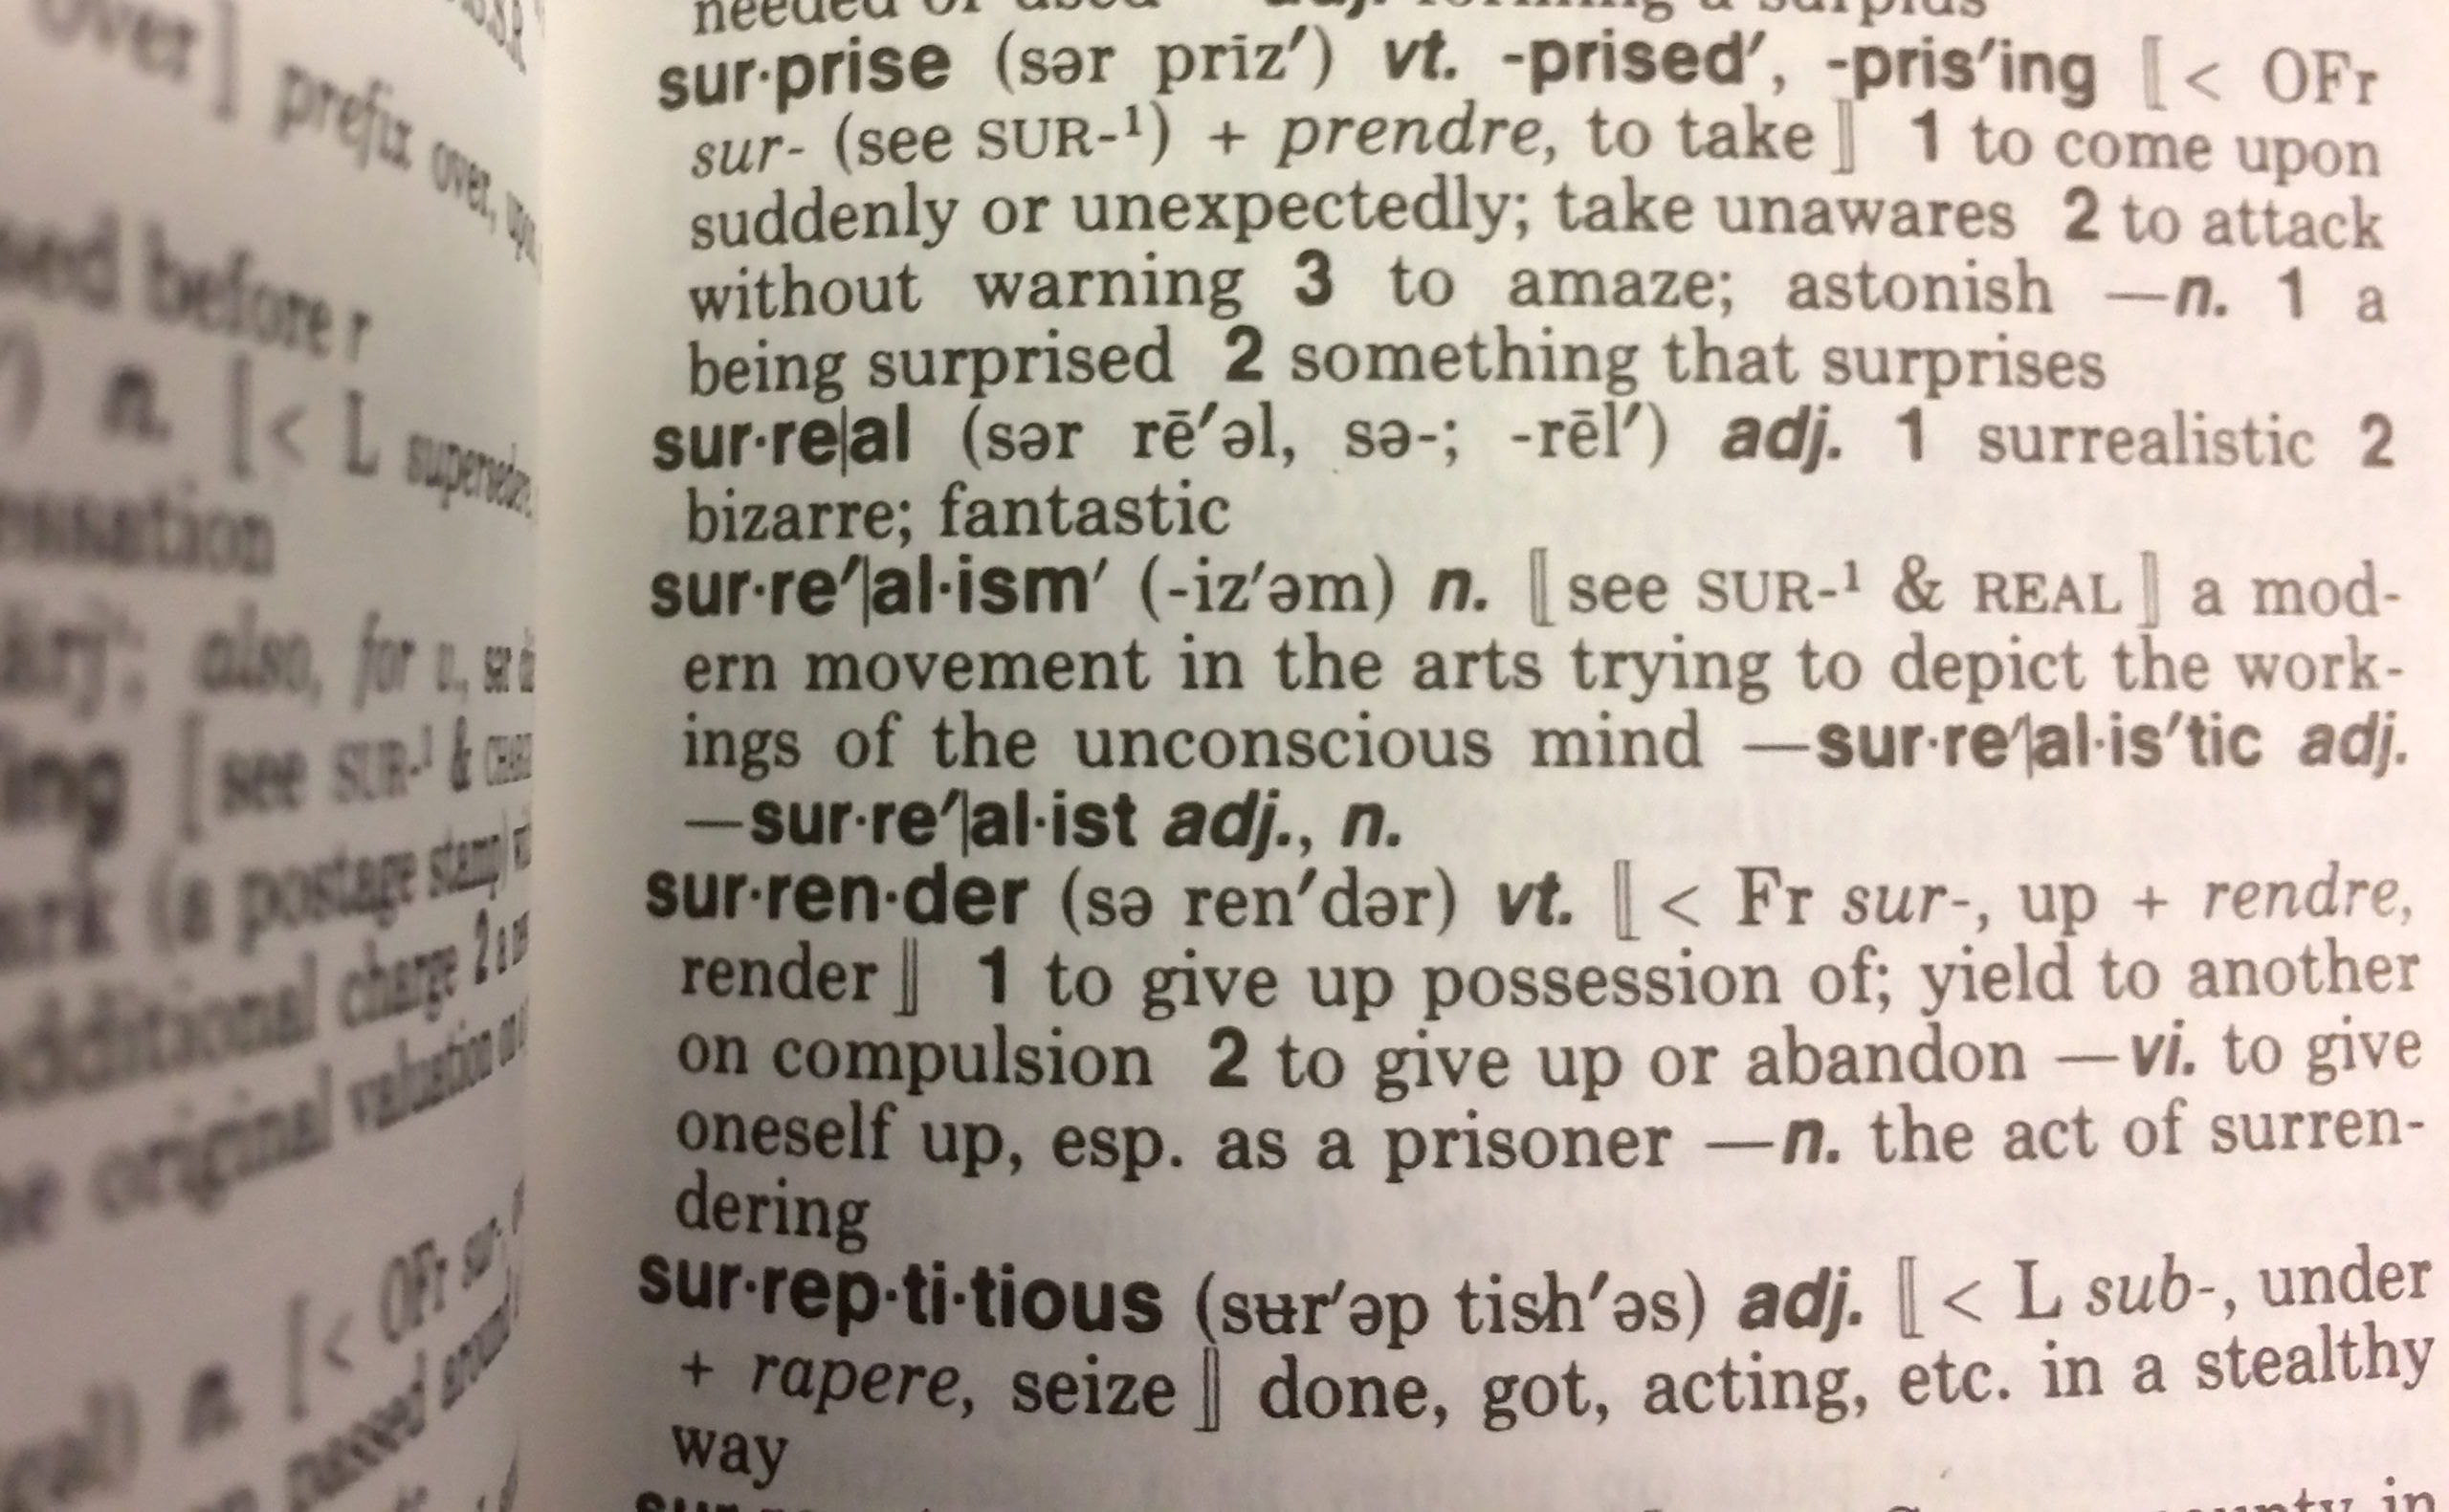 US dictionary Merriam-Webster to change its definition of racism